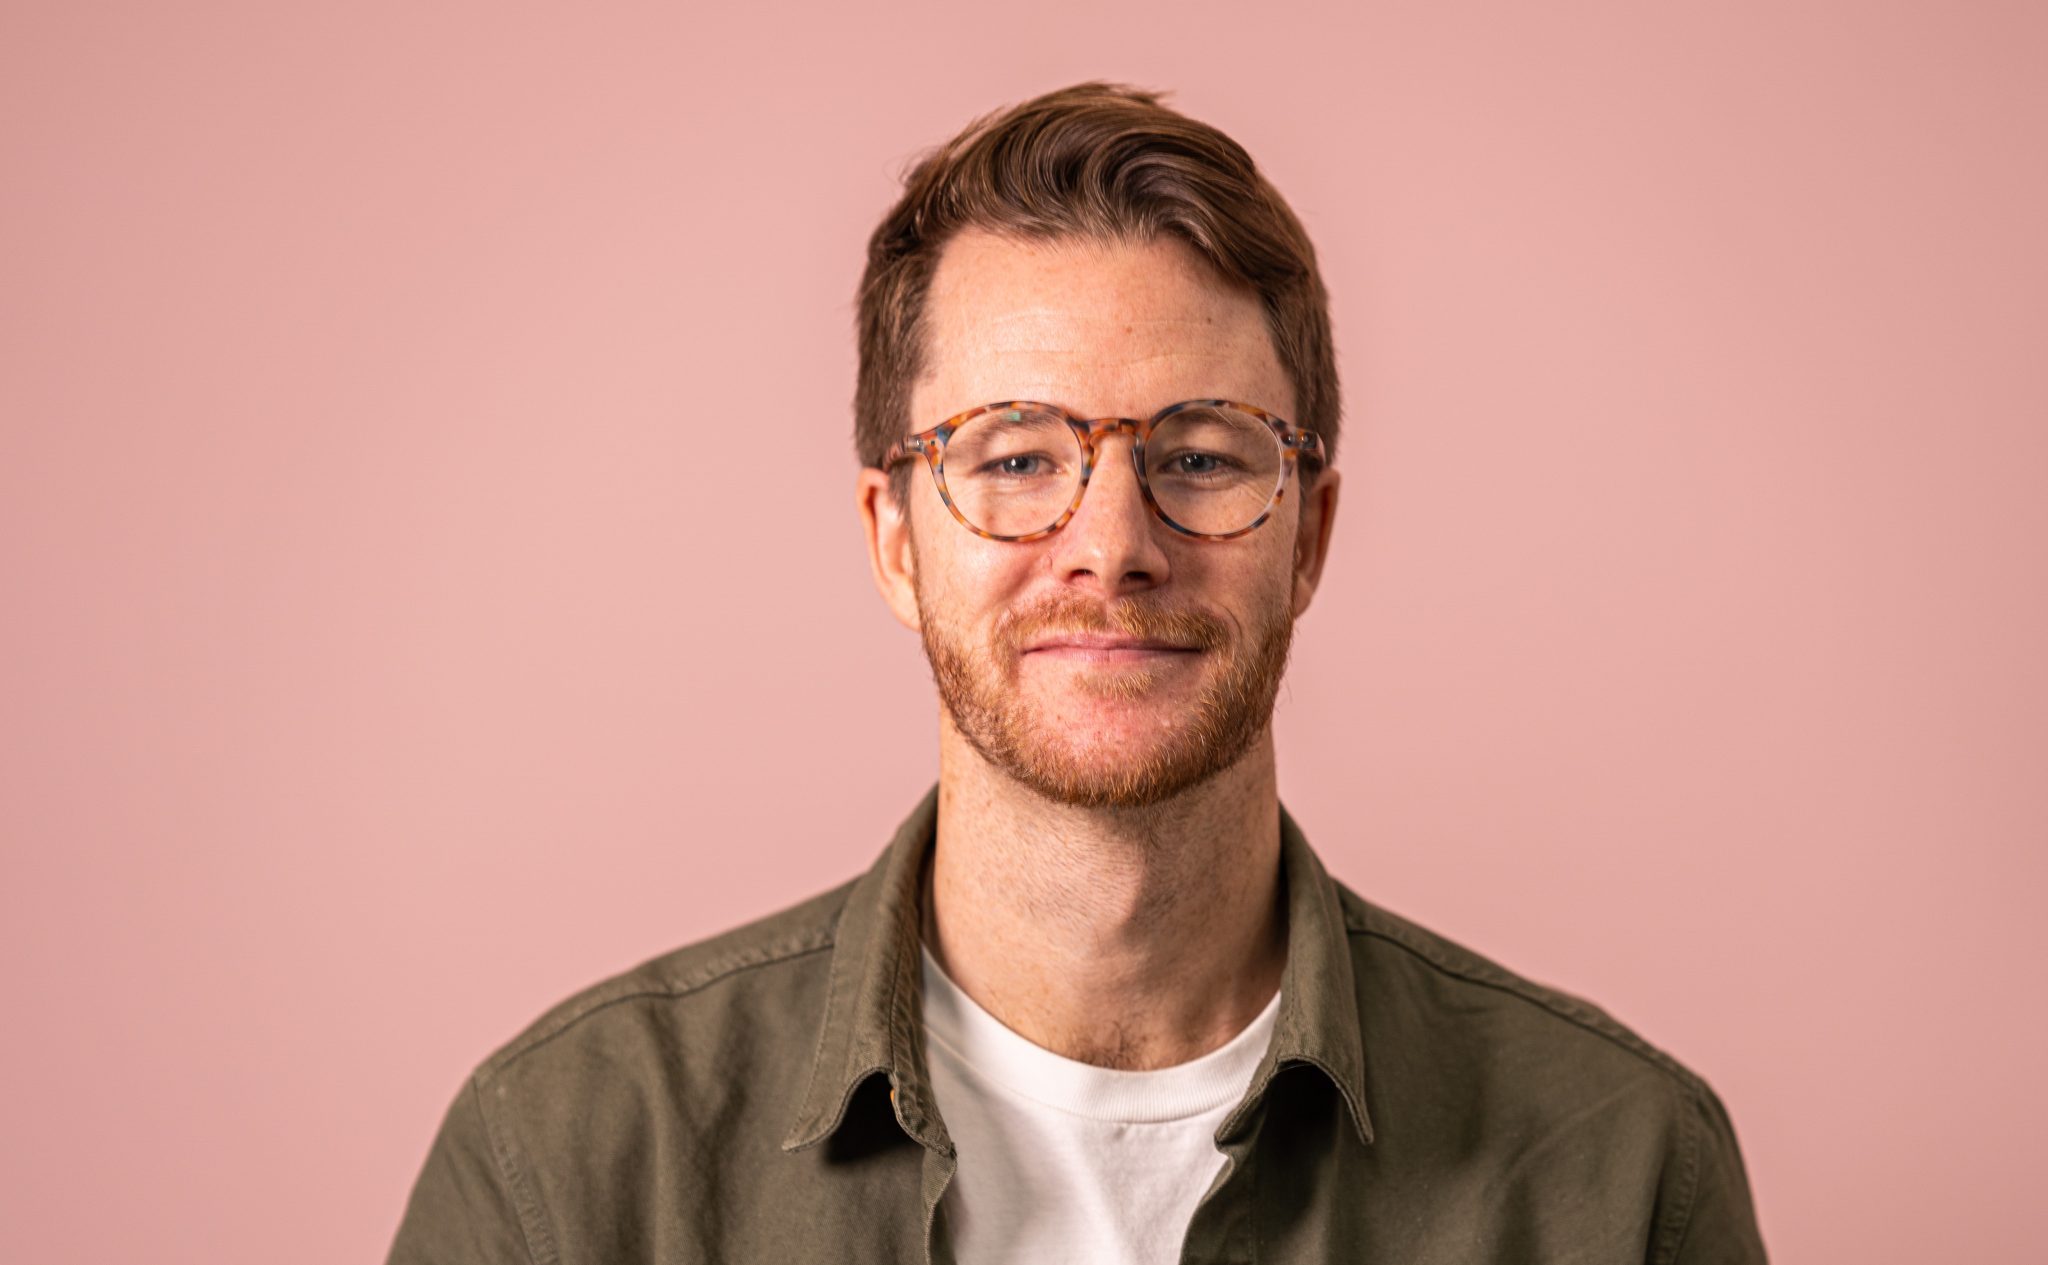 A headshot of Hamish Grierson, CEO and cofounder at Thriva